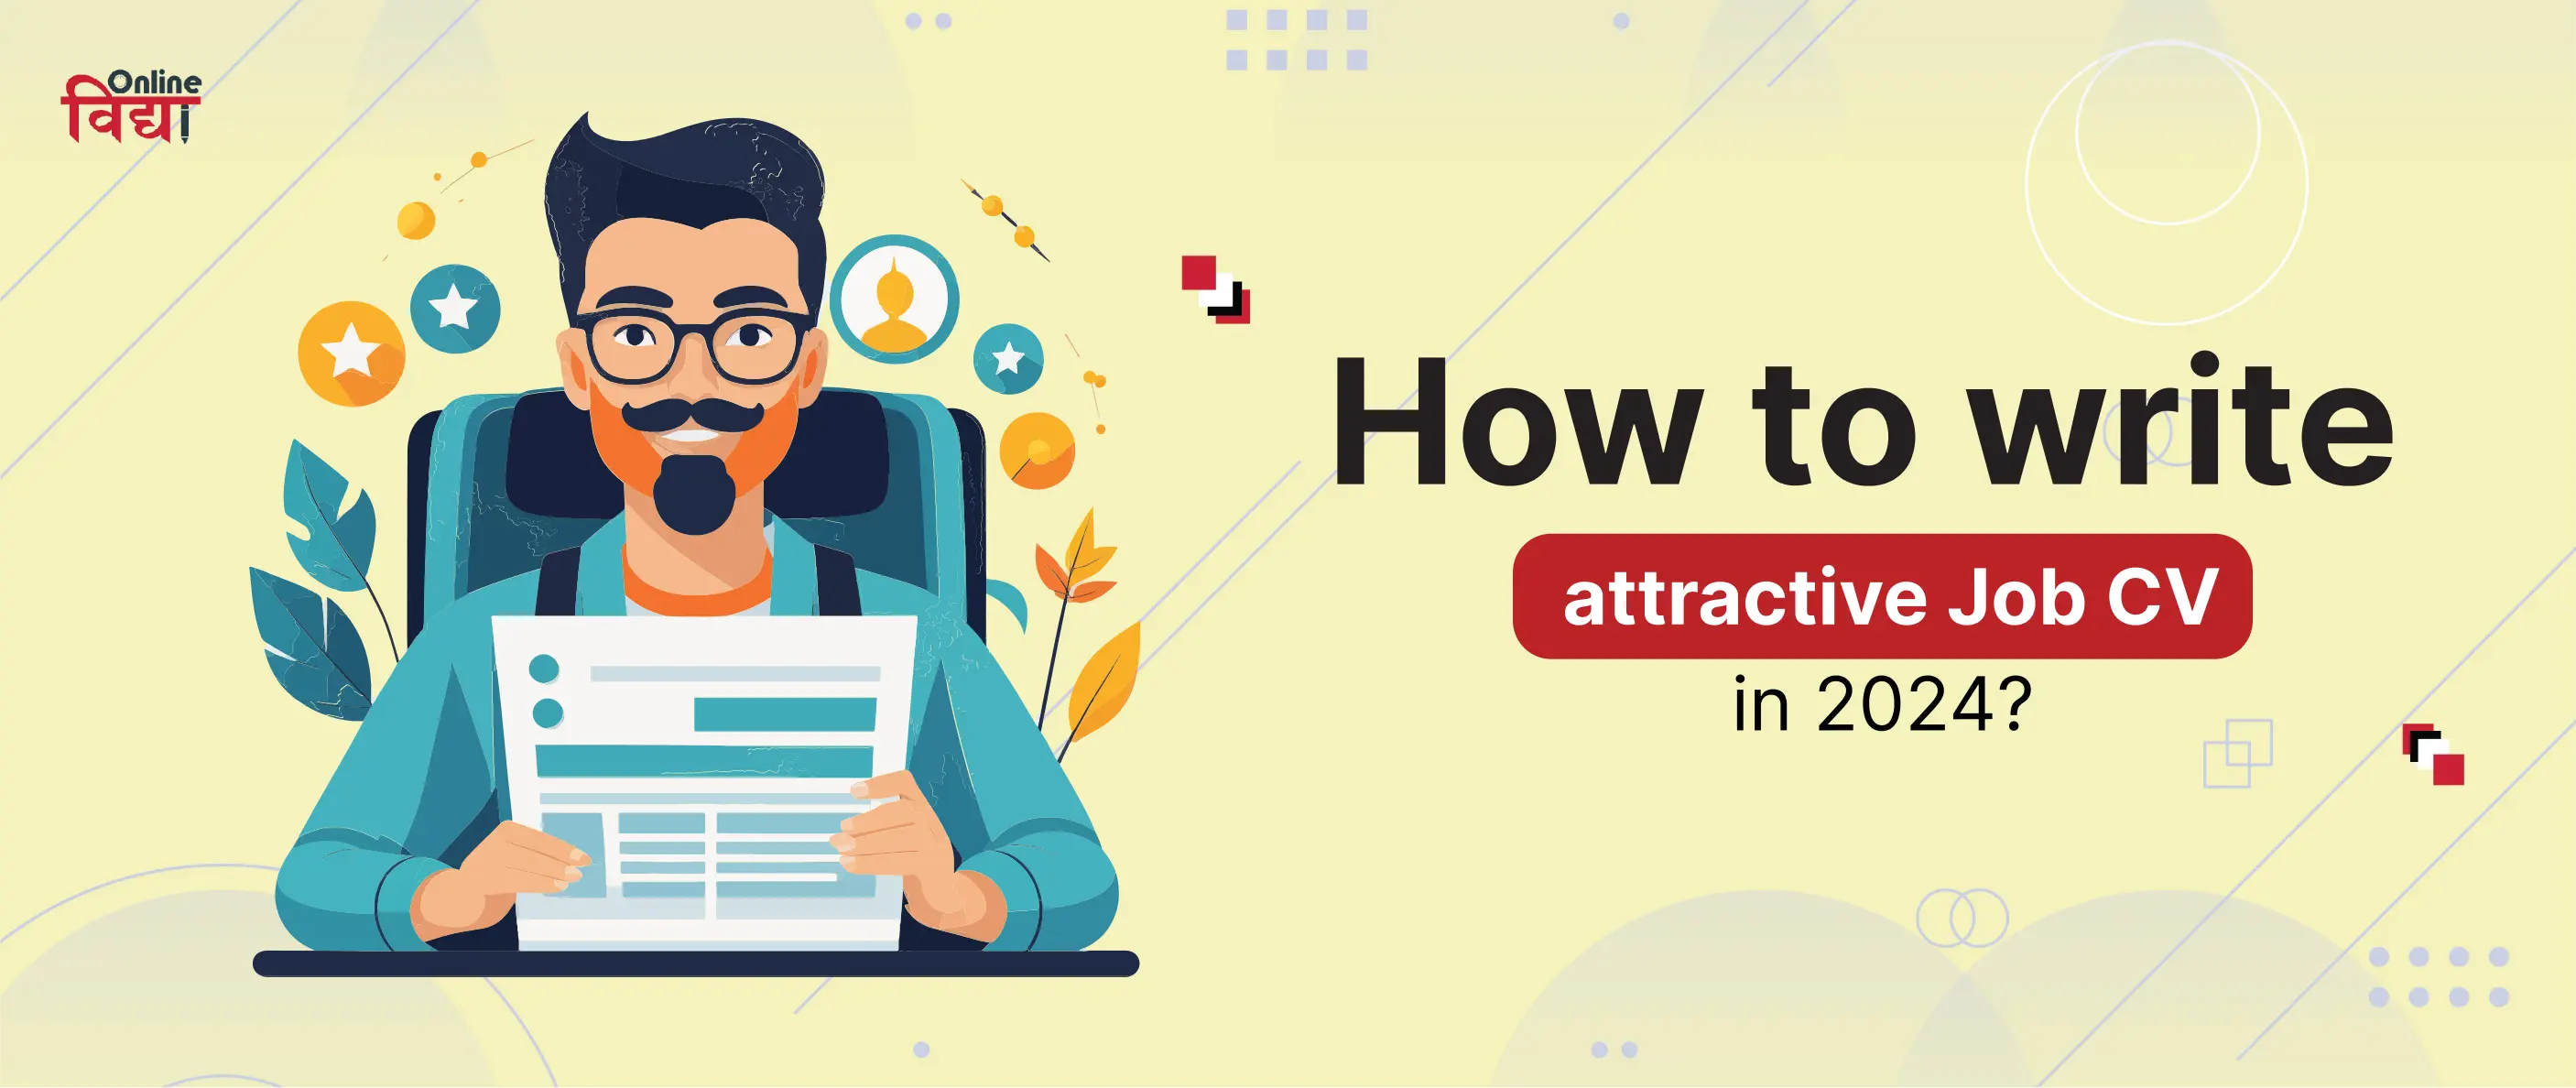 How to write an attractive Job CV in 2024?